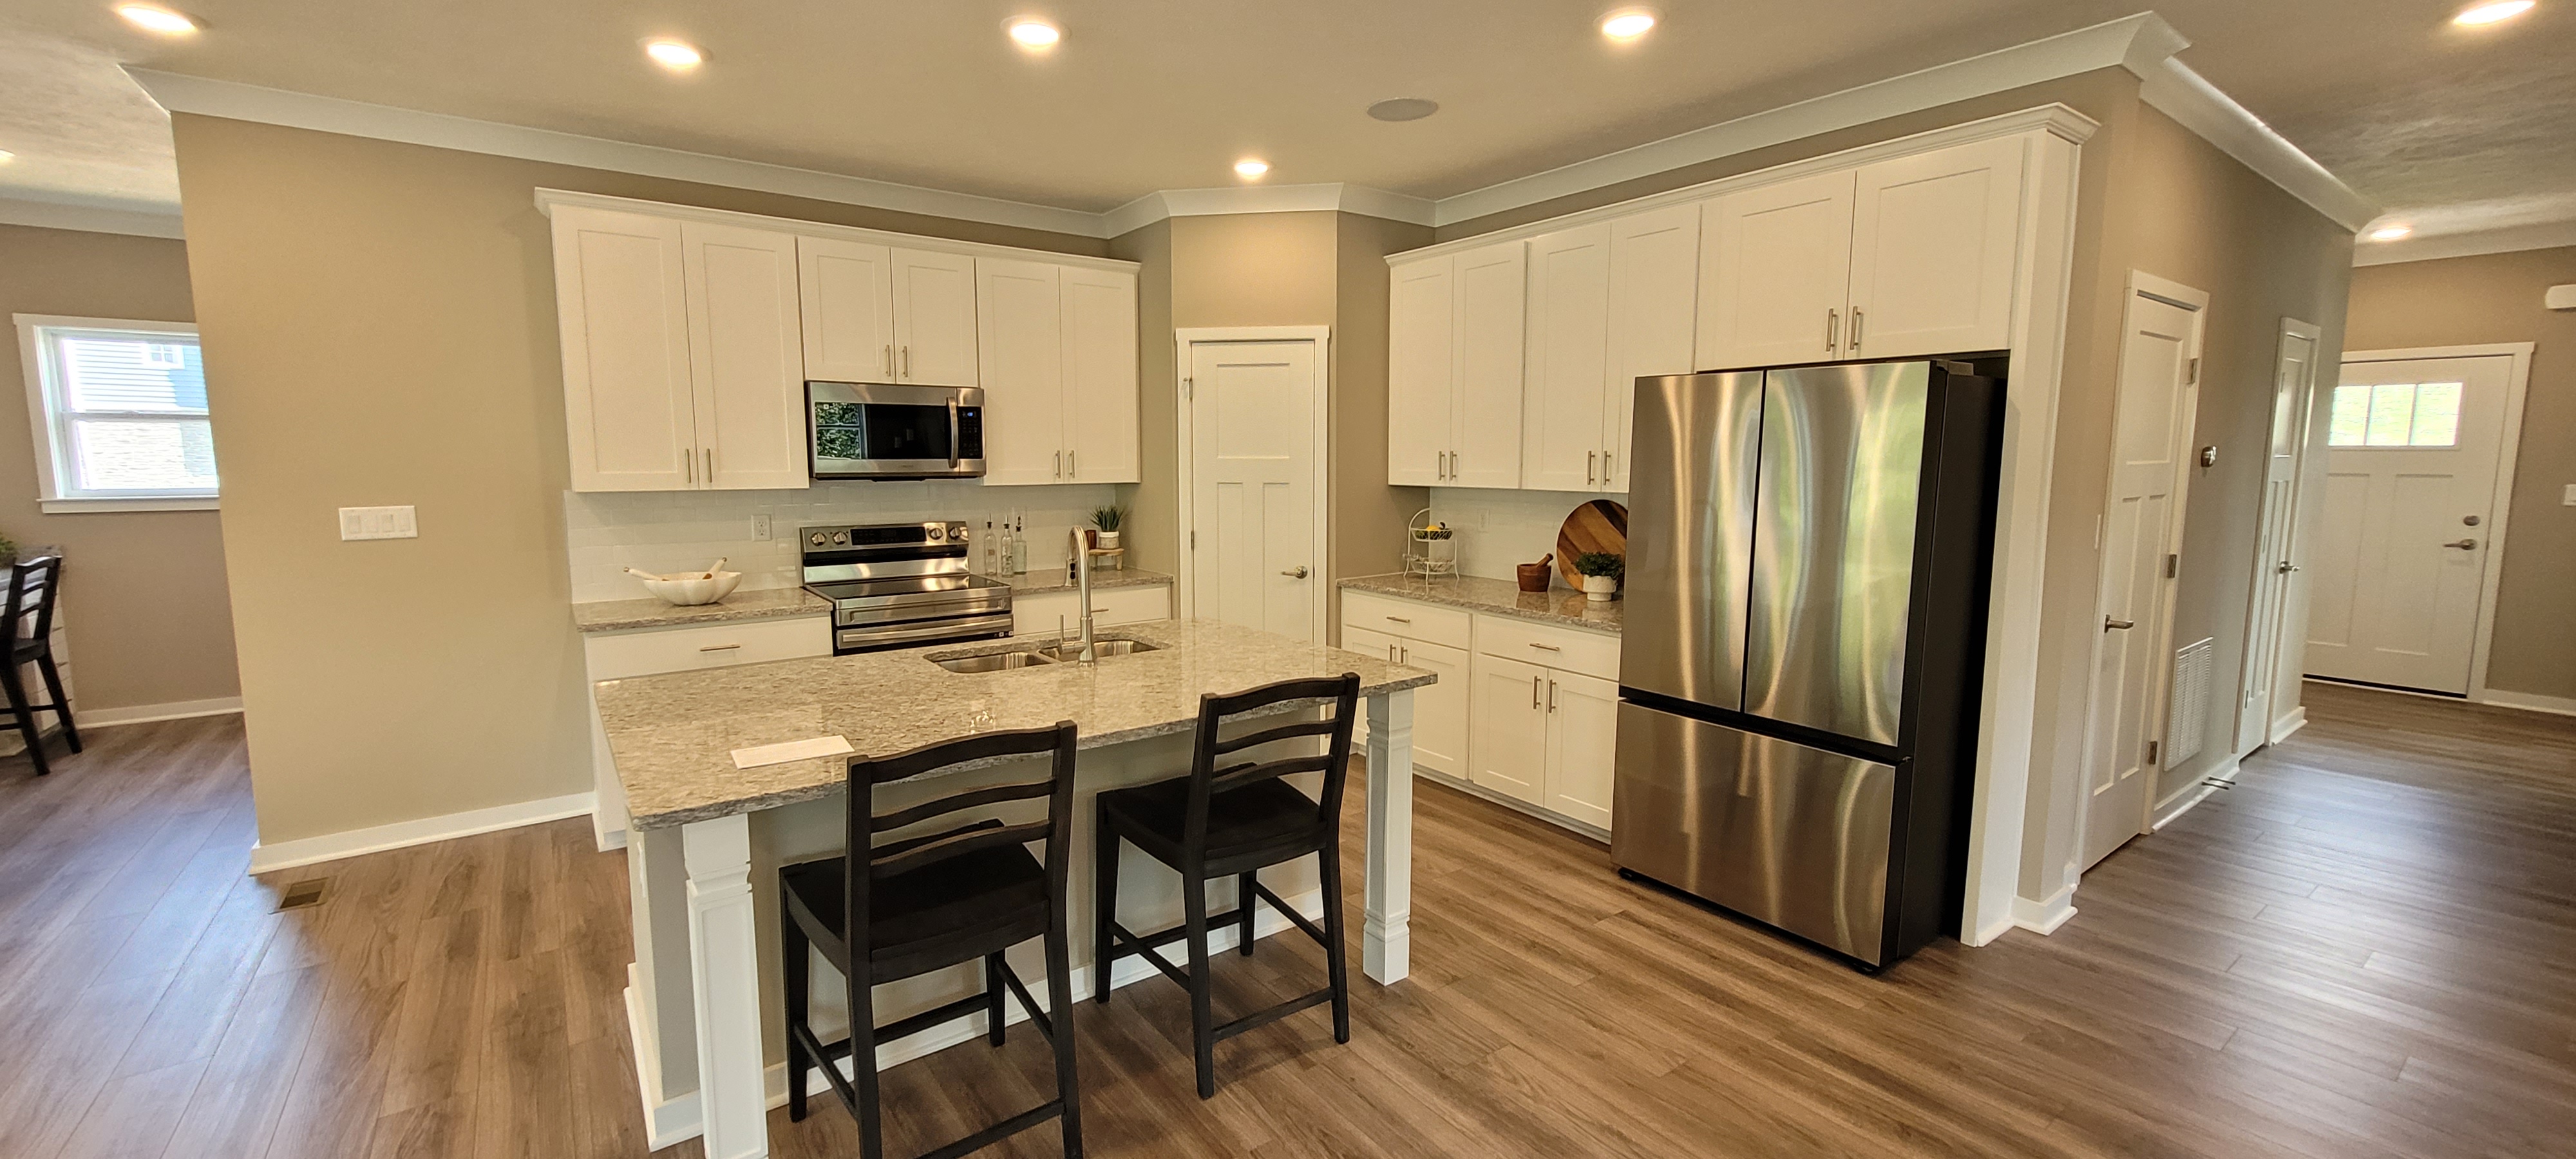 White kitchen with stainless steel appliances in Imperial, PA